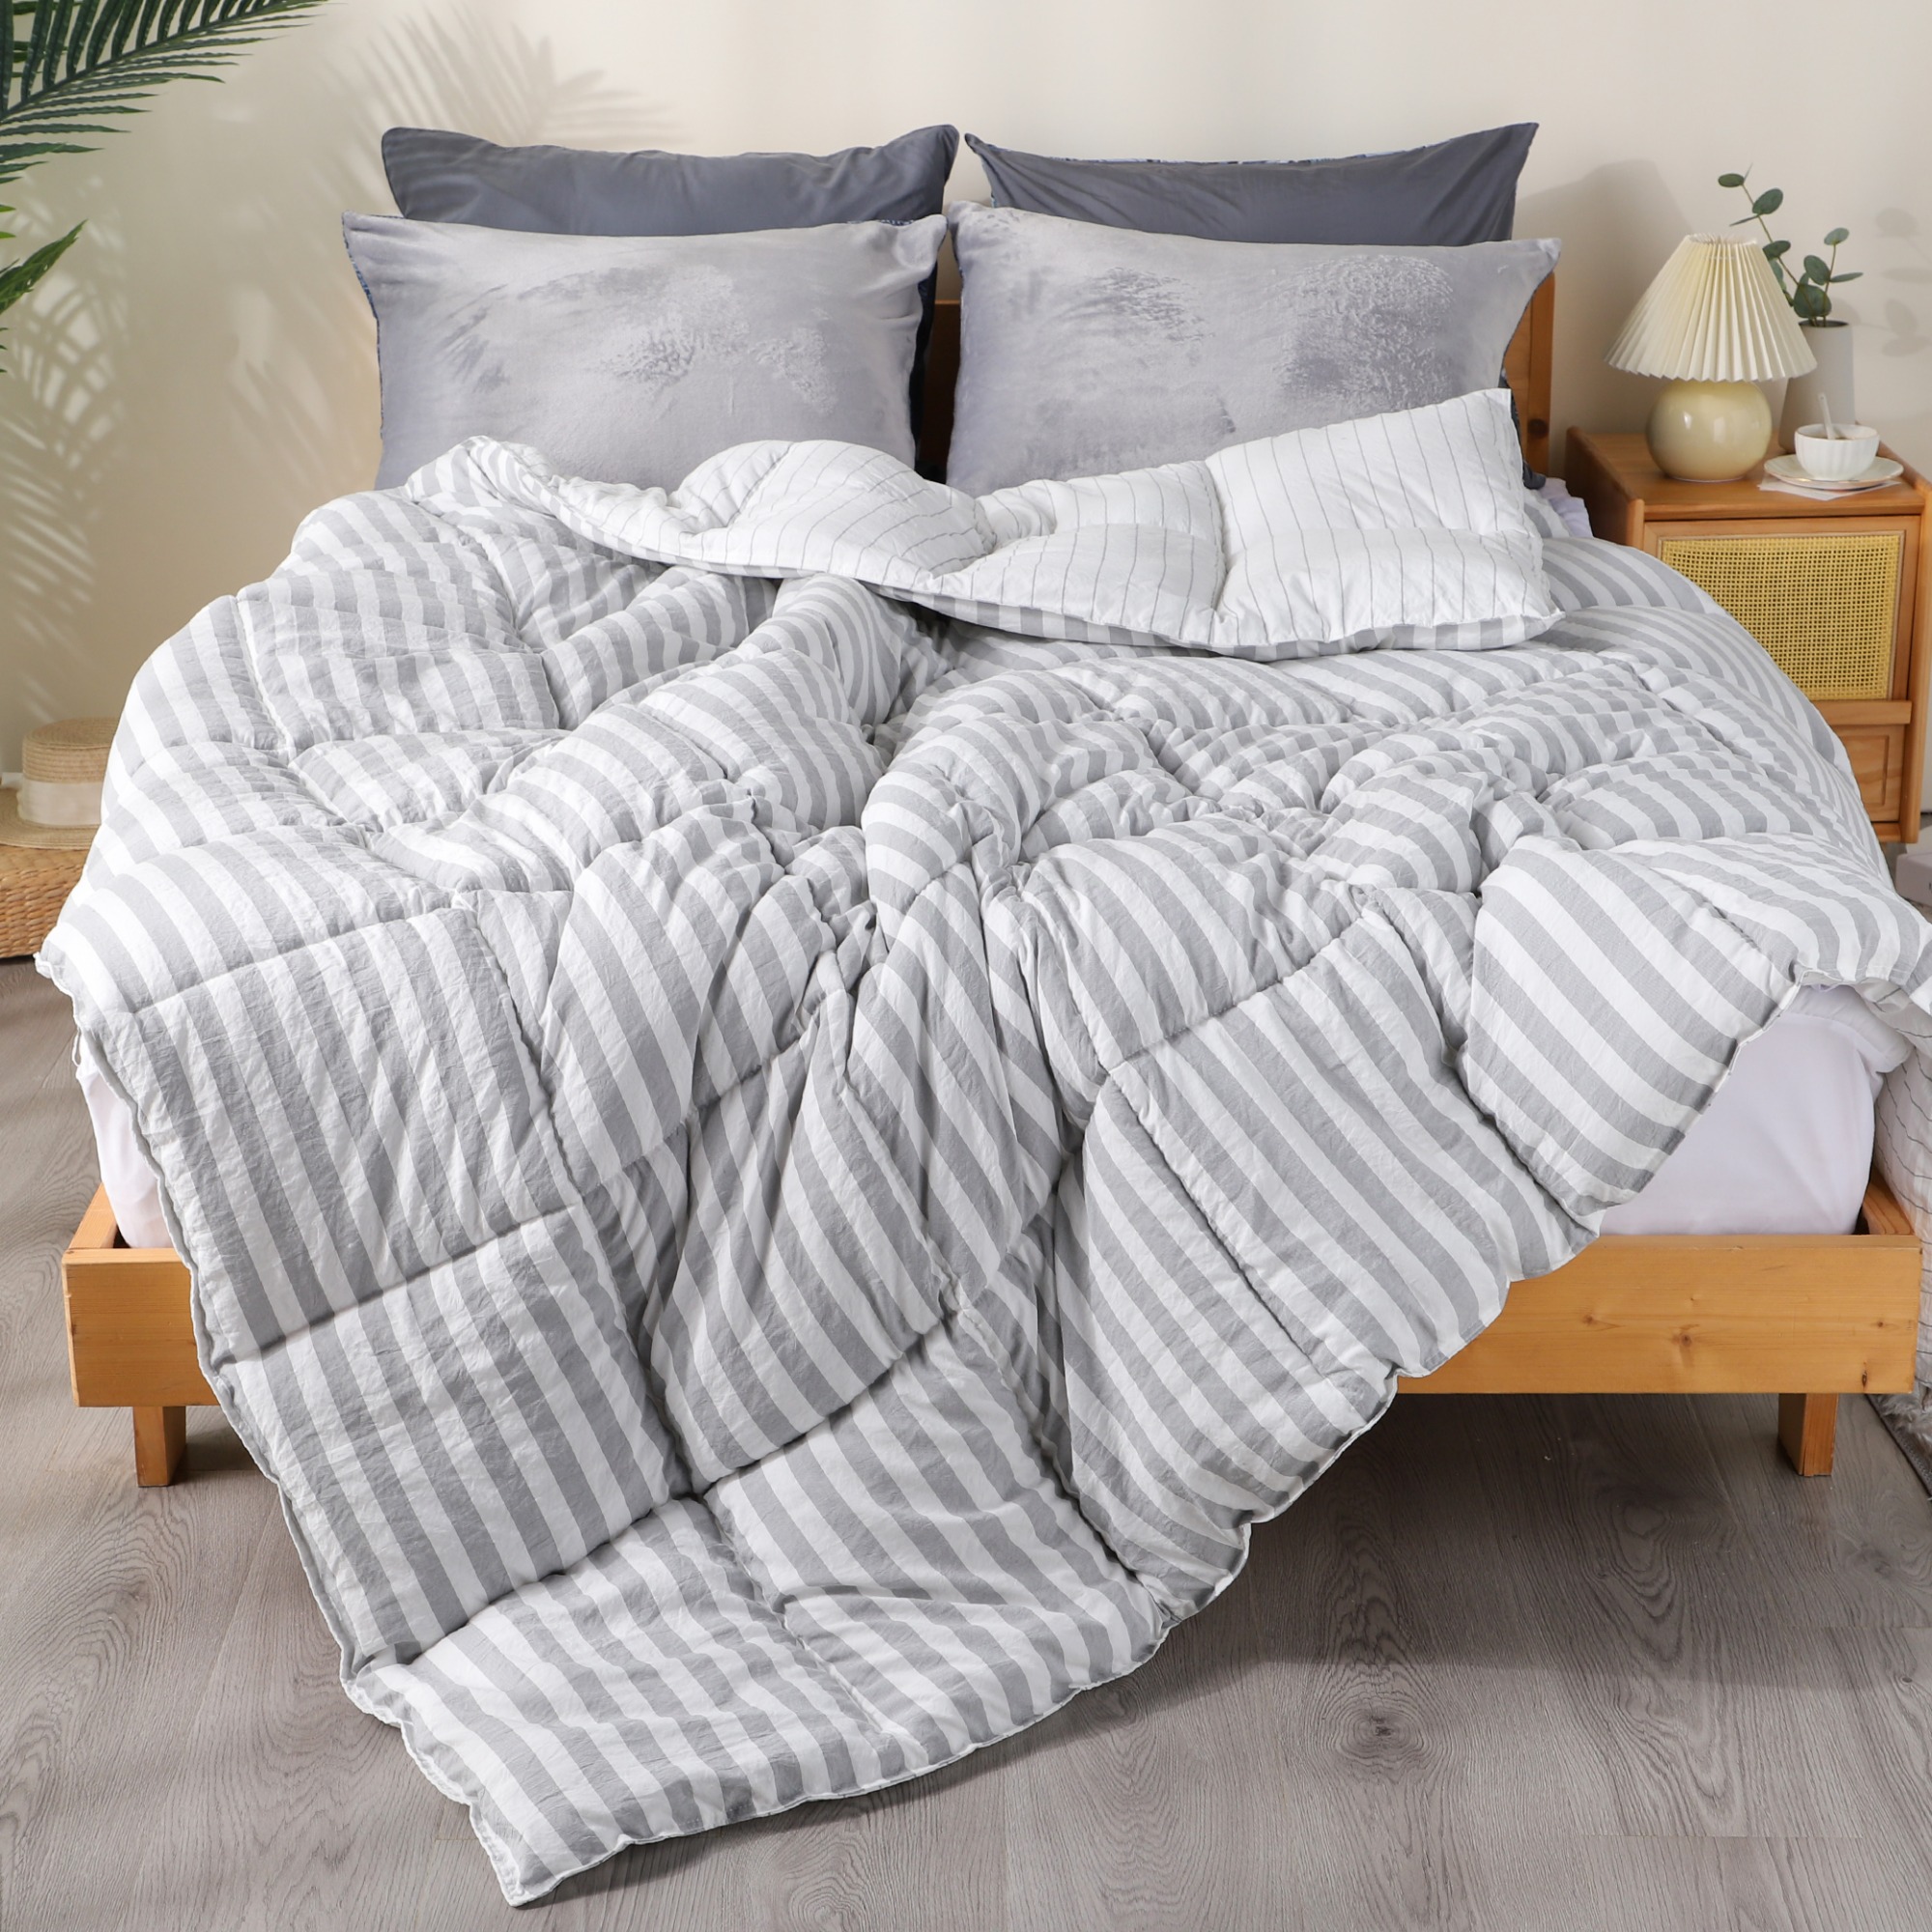 Delighthome Fashion Goose Feathers Down Comforter Set 22KC0035